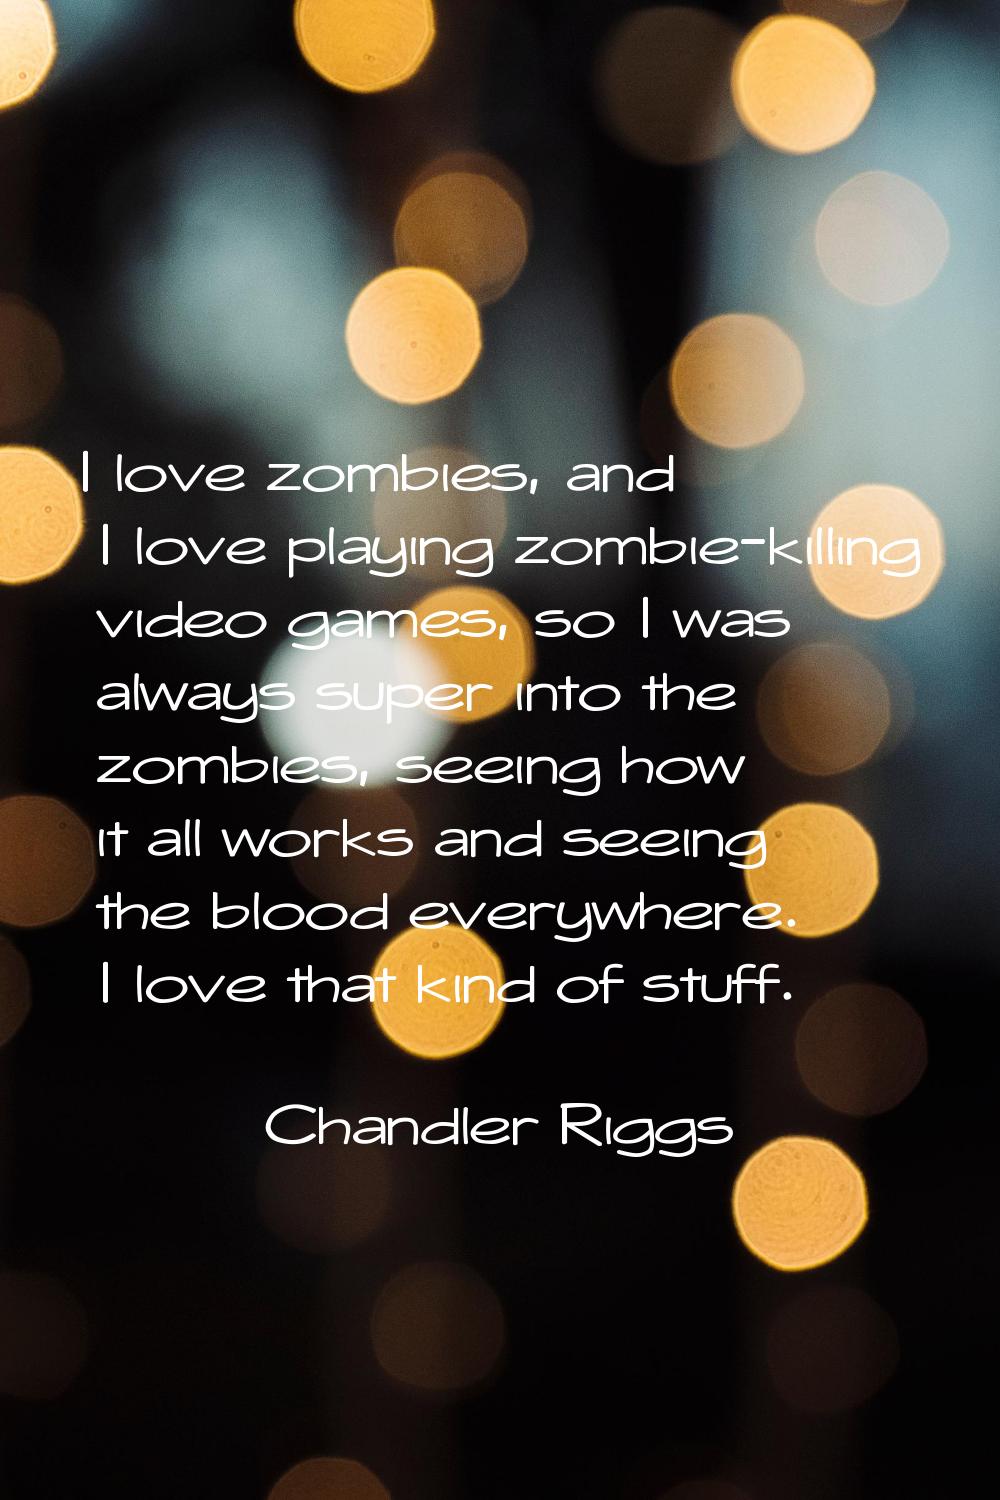 I love zombies, and I love playing zombie-killing video games, so I was always super into the zombi